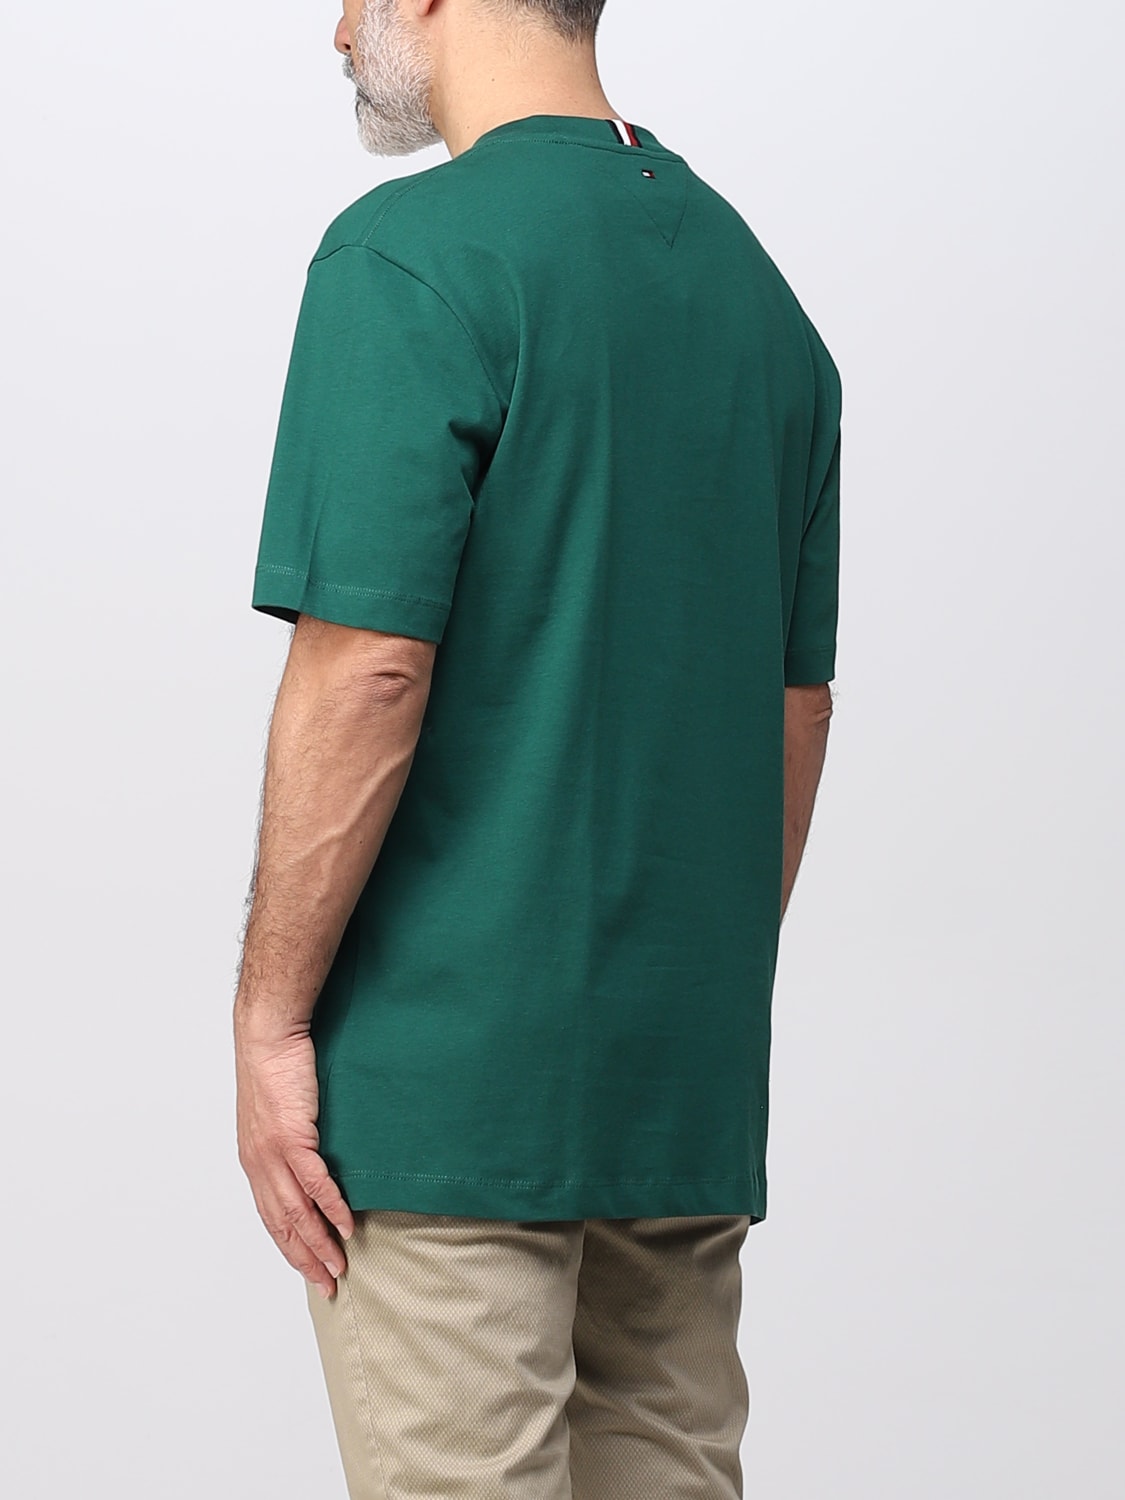 TOMMY HILFIGER: for man - Green | Tommy Hilfiger t-shirt MW0MW29597 online on GIGLIO.COM